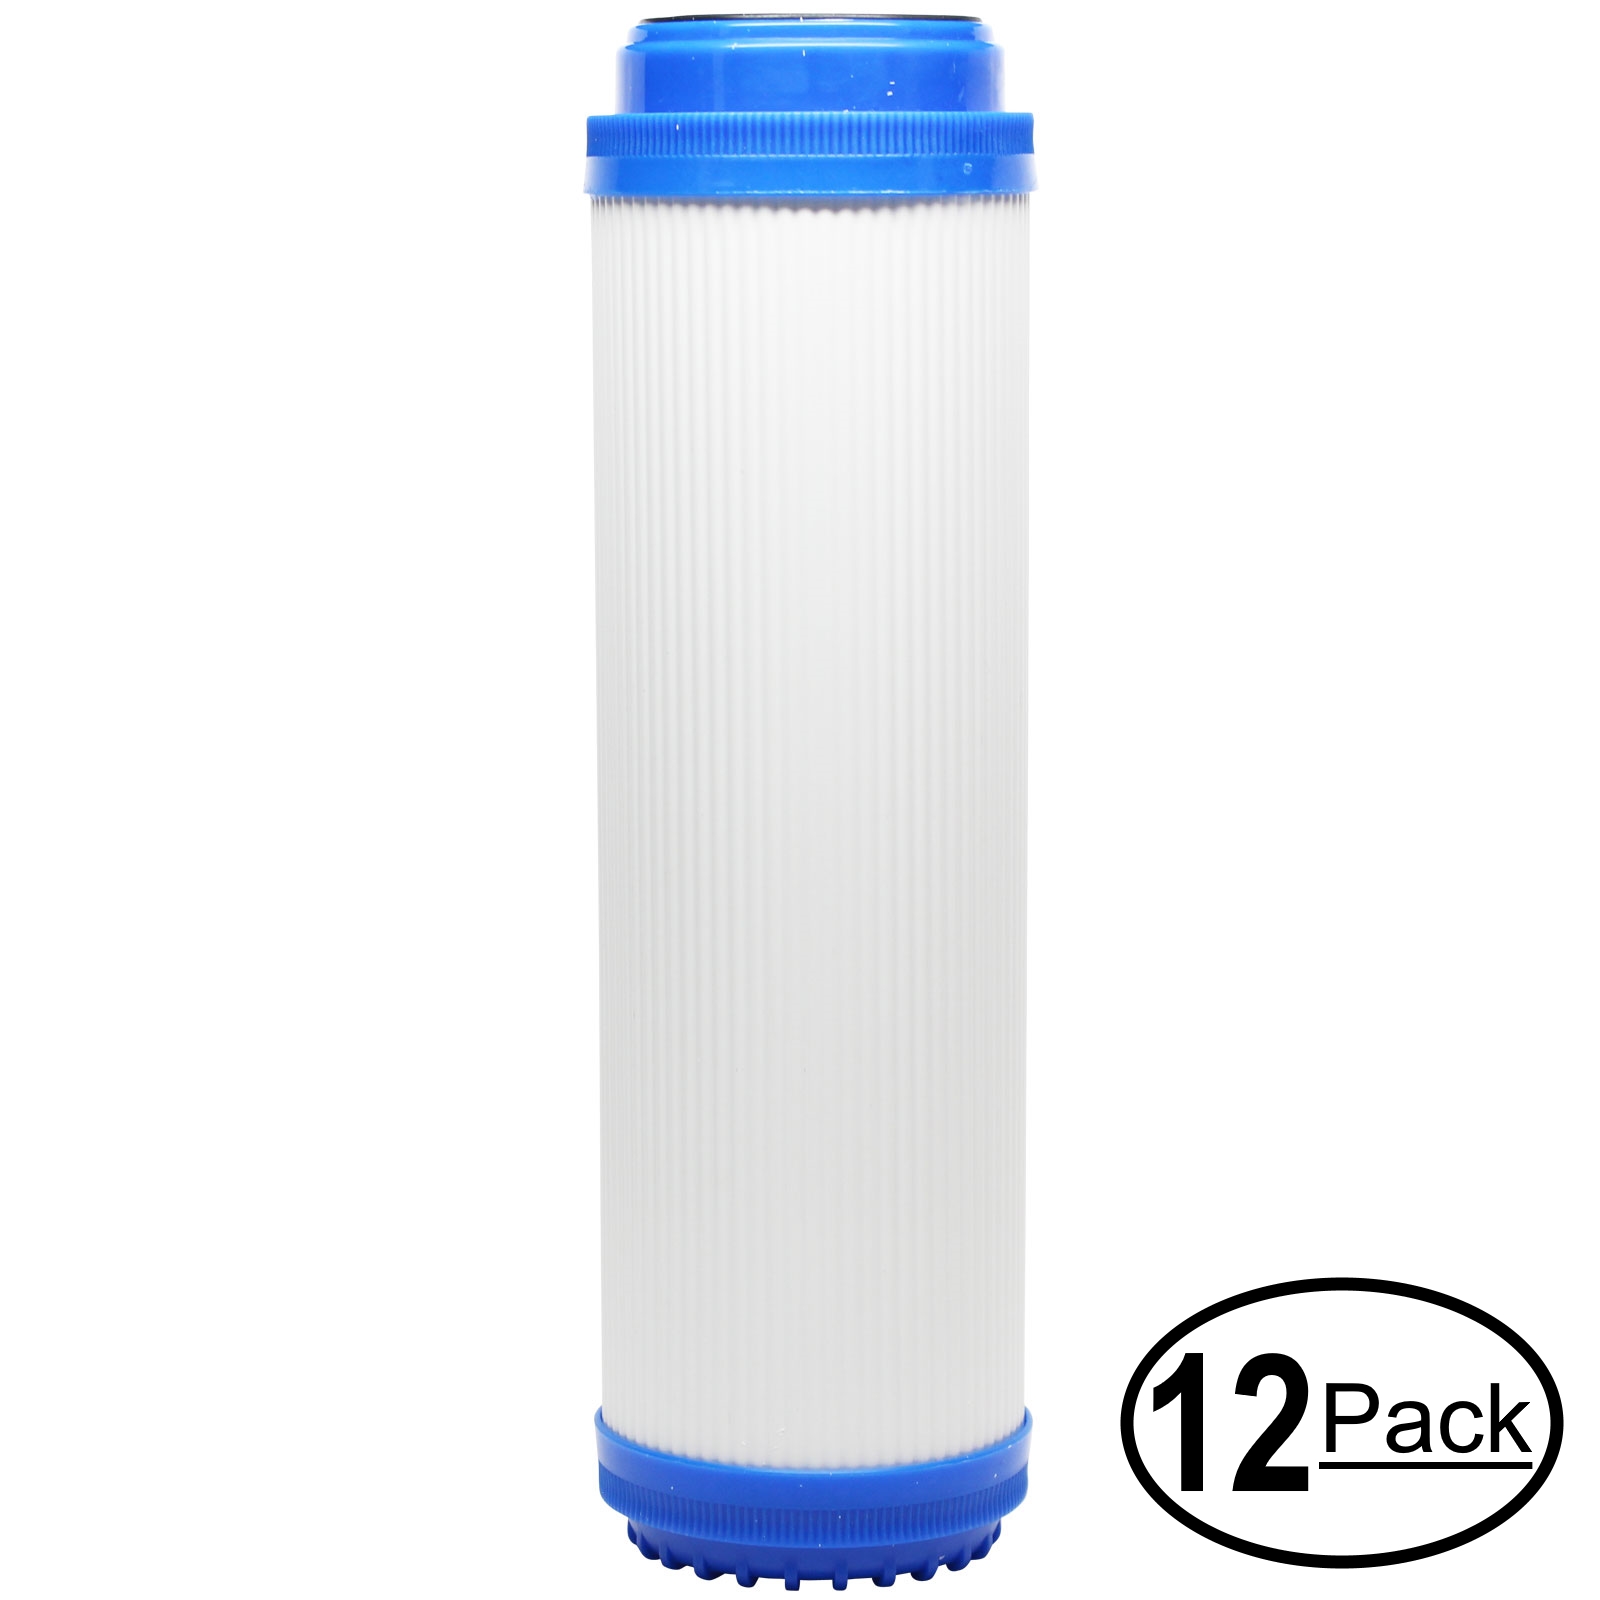 12-Pack Replacement for Watts CT-1 Granular Activated Carbon Filter - Universal 10-inch Cartridge for WATTS PREMIER 500515 CT-1 DRINKING WATER SYSTEM - Denali Pure Brand - image 1 of 4